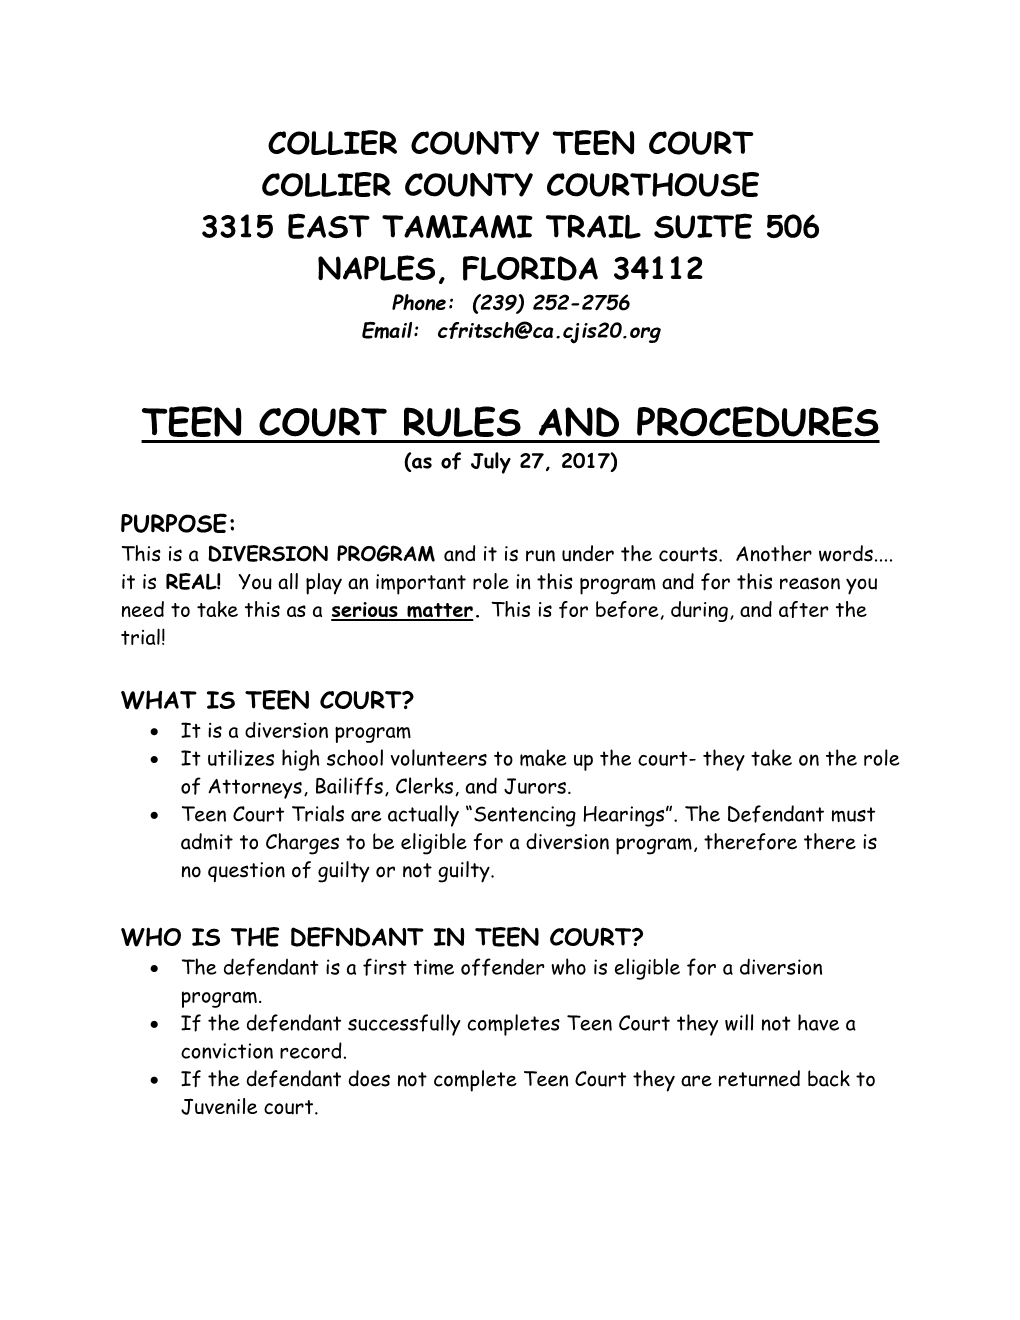 TEEN COURT RULES and PROCEDURES (As of July 27, 2017)